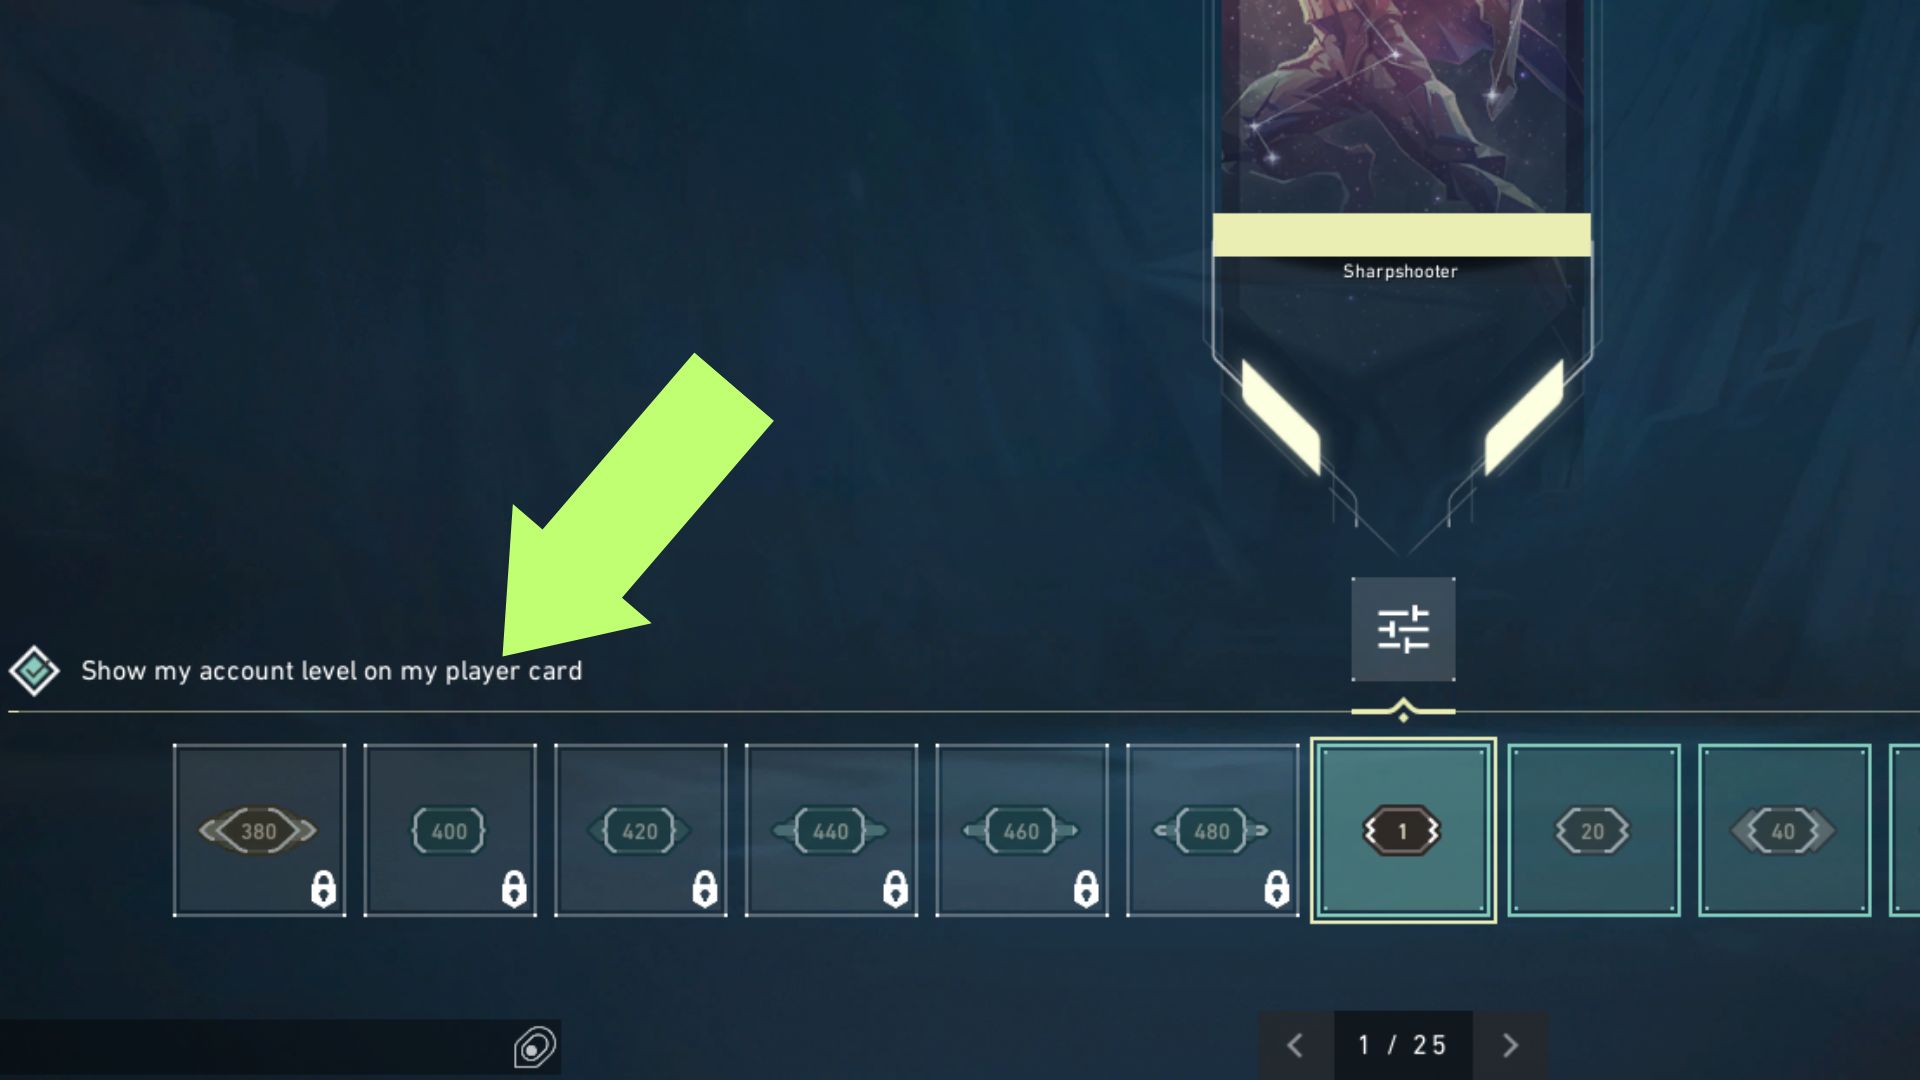 Once inside your Player Card menu, you can tick or untick "Show my account level on my player card"